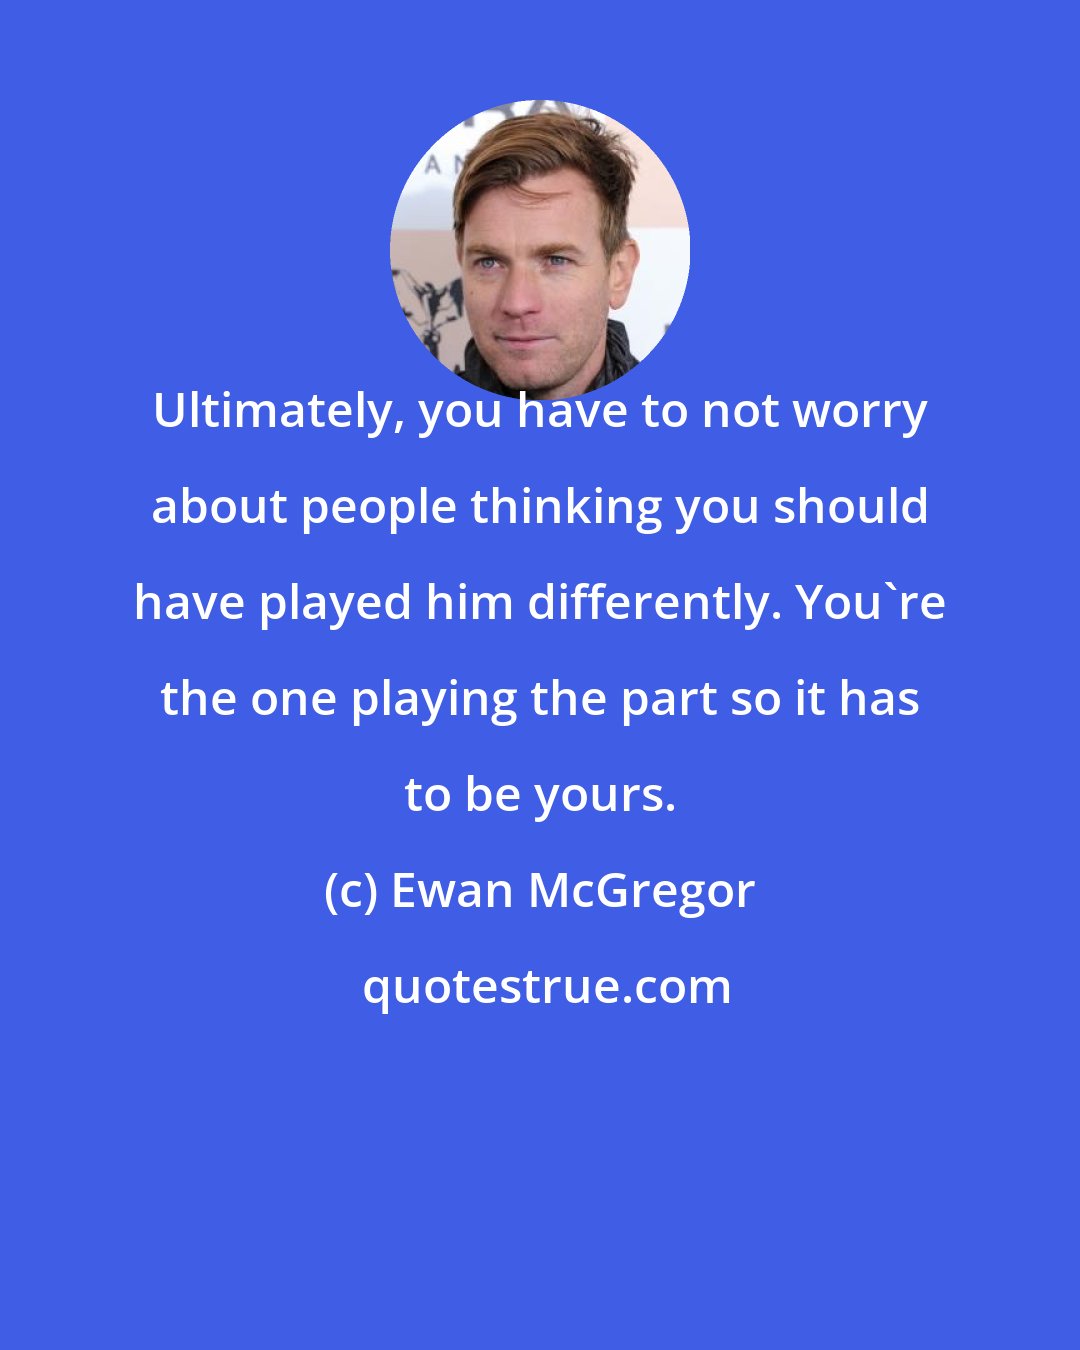 Ewan McGregor: Ultimately, you have to not worry about people thinking you should have played him differently. You're the one playing the part so it has to be yours.